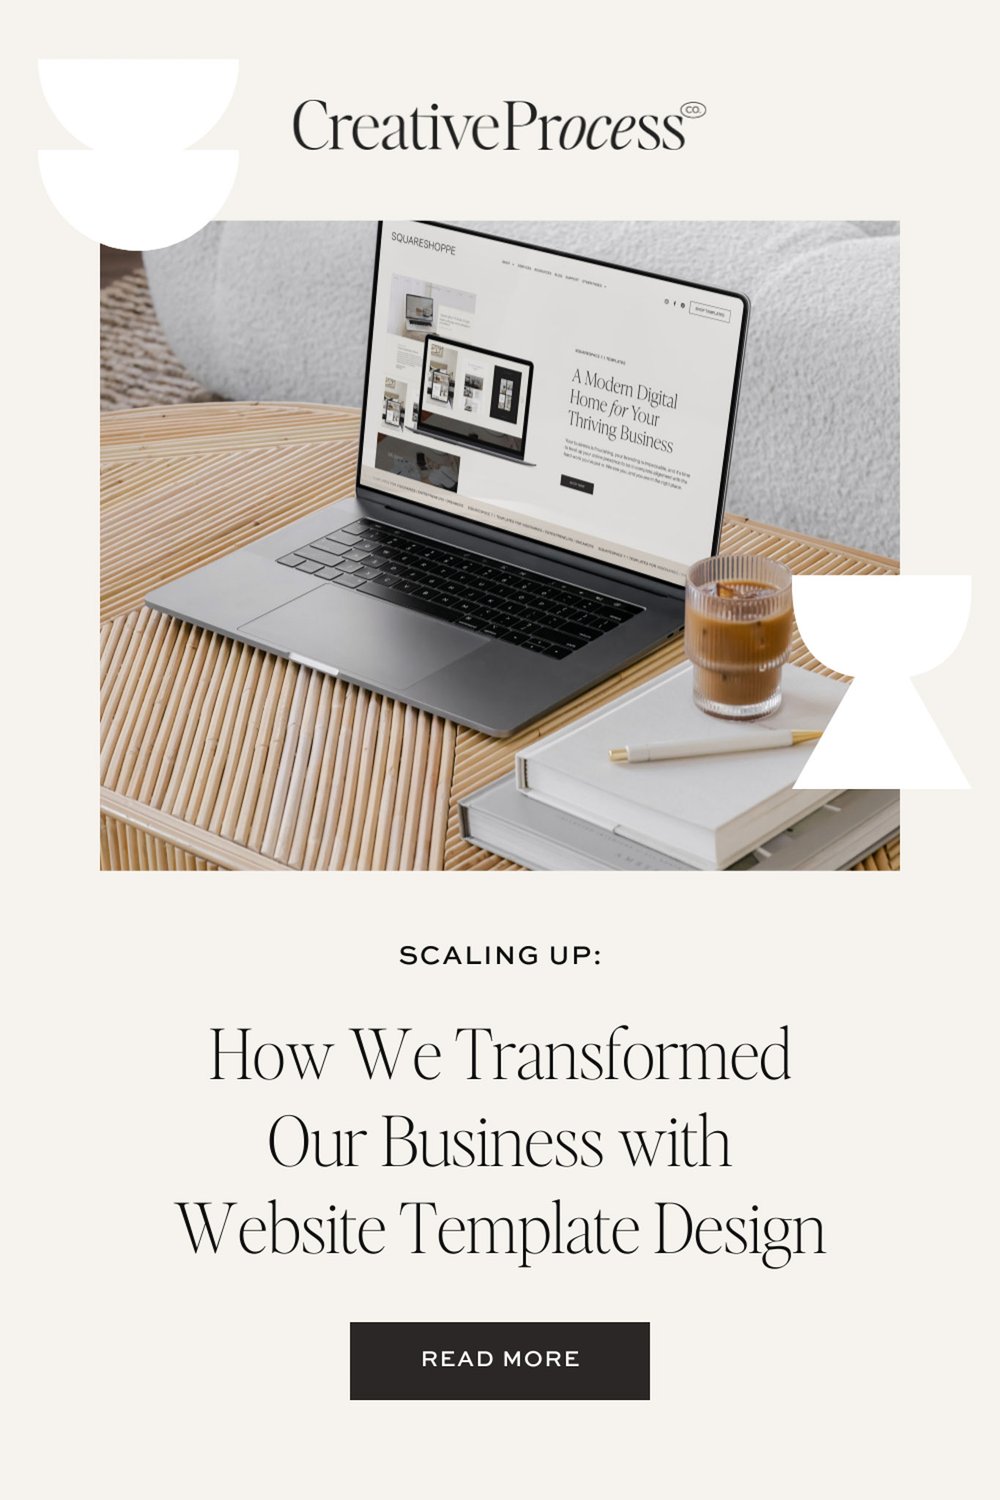 Scaling Up: How We Transformed Our Business with Website Template Design